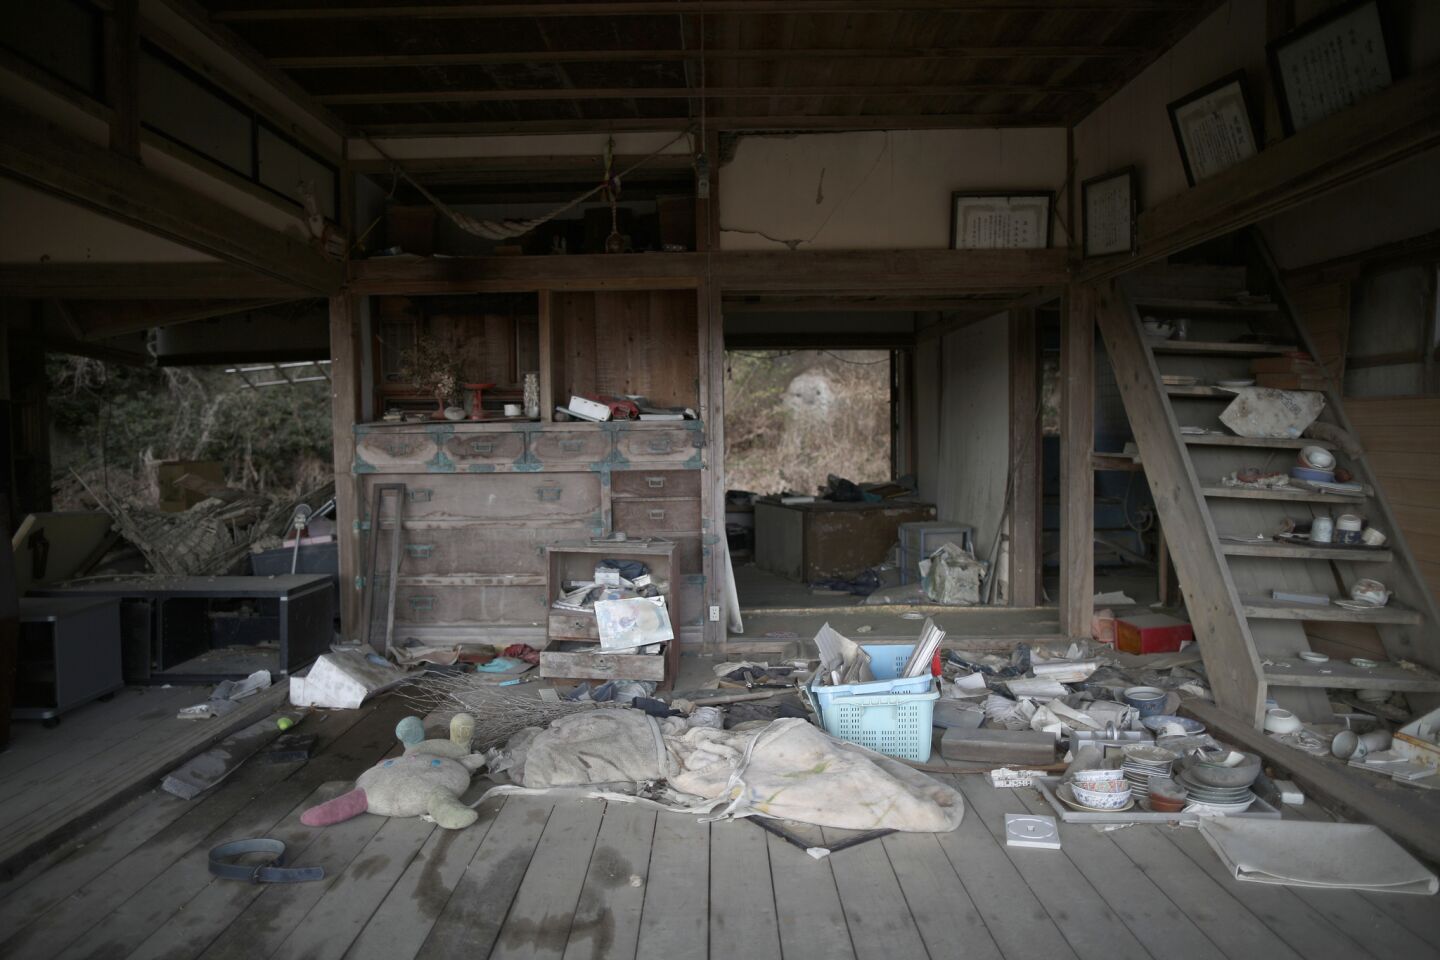 Inside the exclusion zone